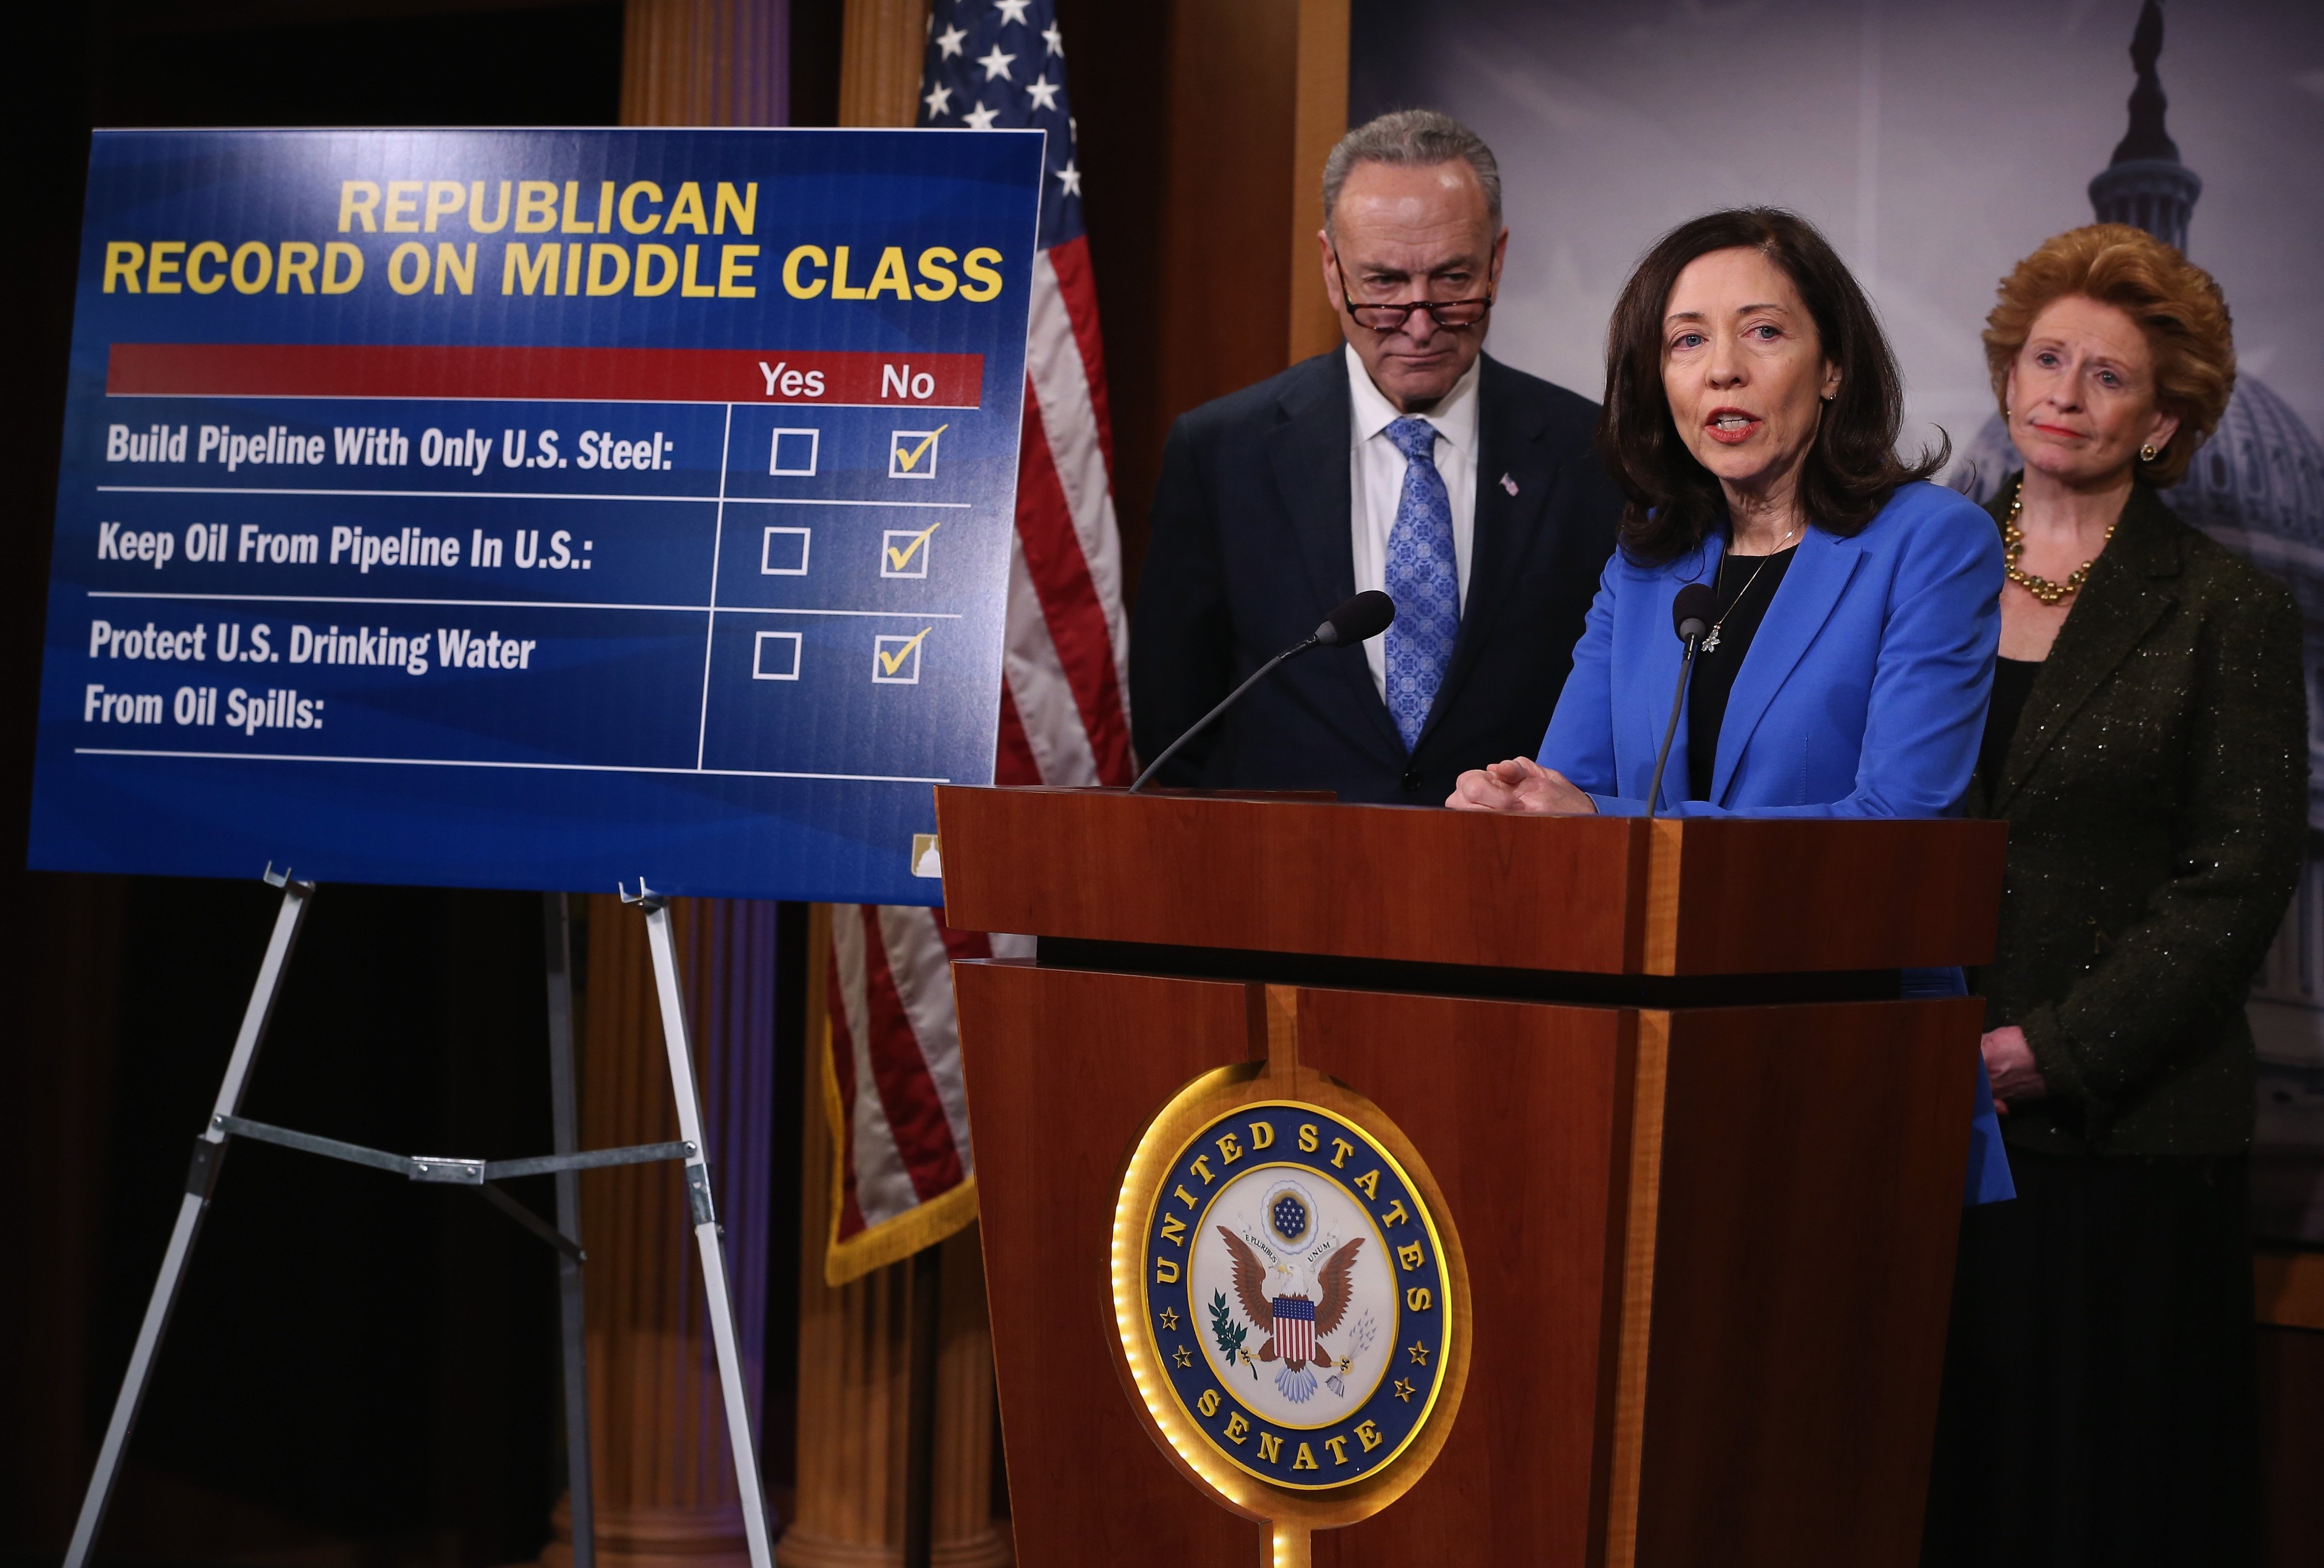 Sen. Maria Cantwell (D-WA) (C) speaks about the Keystone XL Pipeline while flanked by Sen. Chuck Schumer (D-NY) and Sen. Debbie Stabenow (D-MI) during a news conference on Jan. 29, 2015 at the US Capitol in Washington D.C. (Mark Wilson—Getty Images)